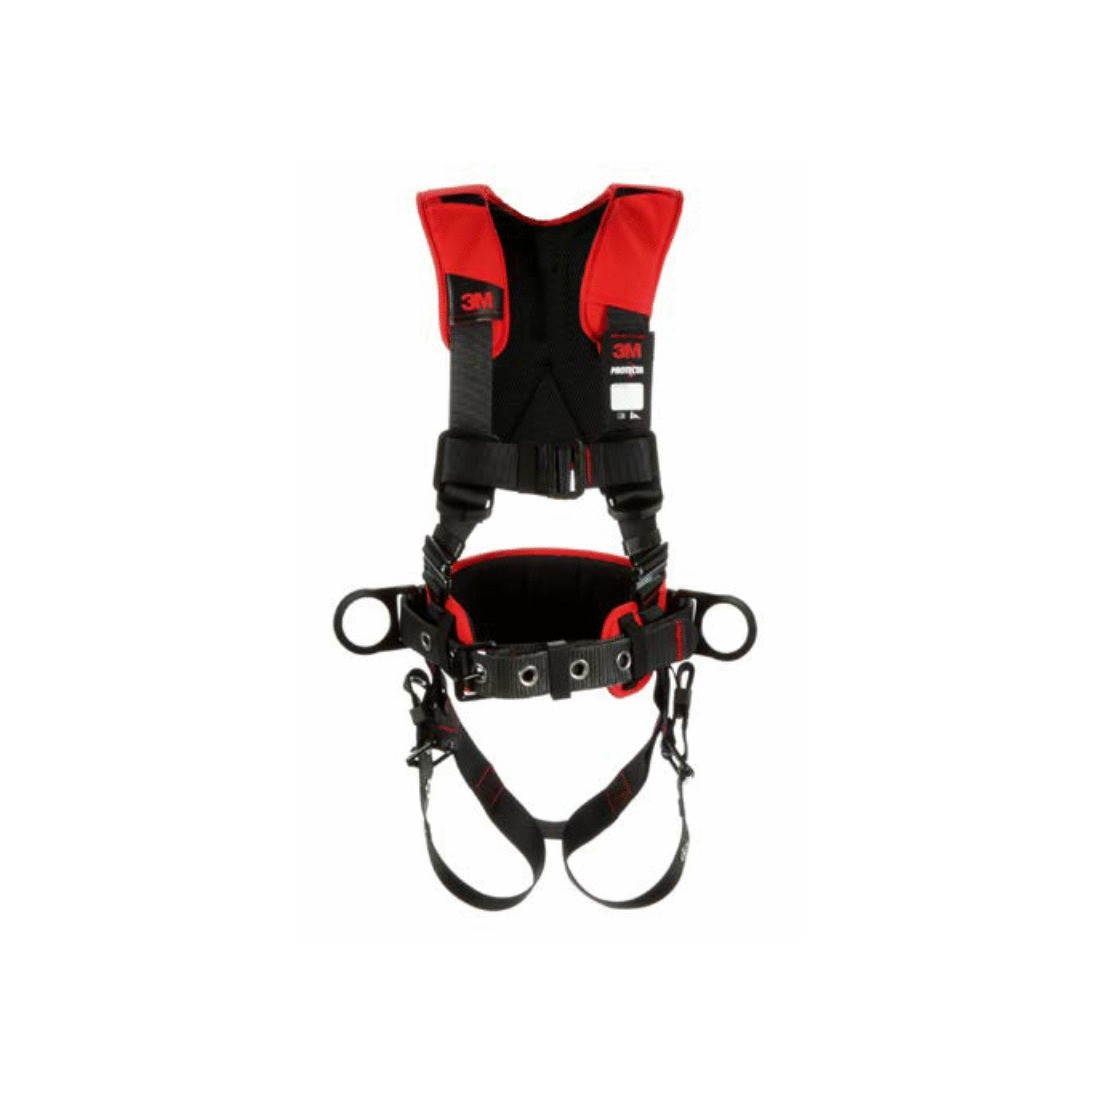 Economic combo positioning harness and belt